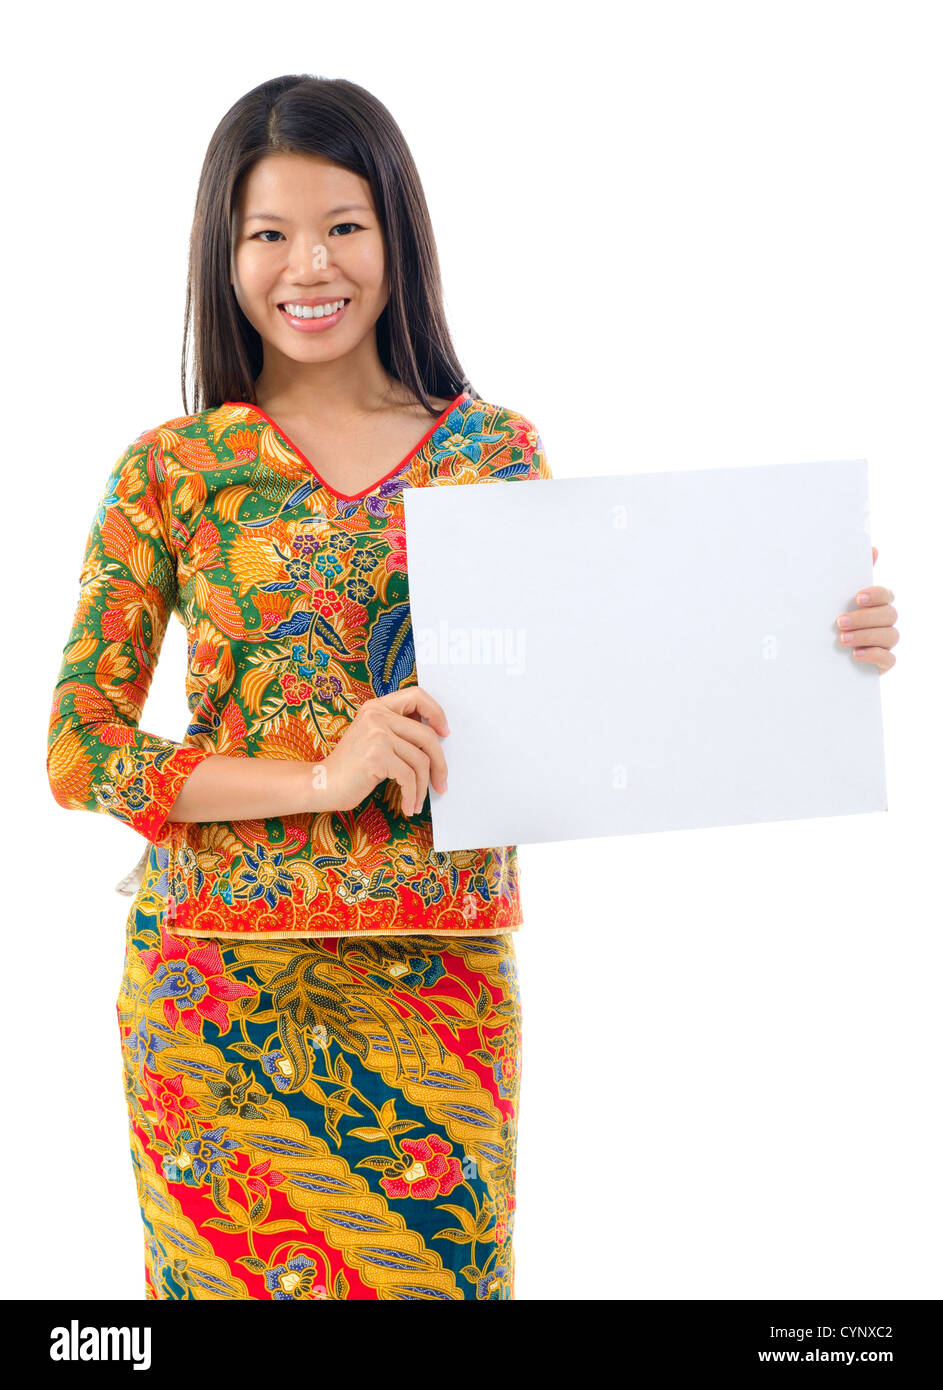 Asian woman in batik dress holding a placard over white background Stock Photo